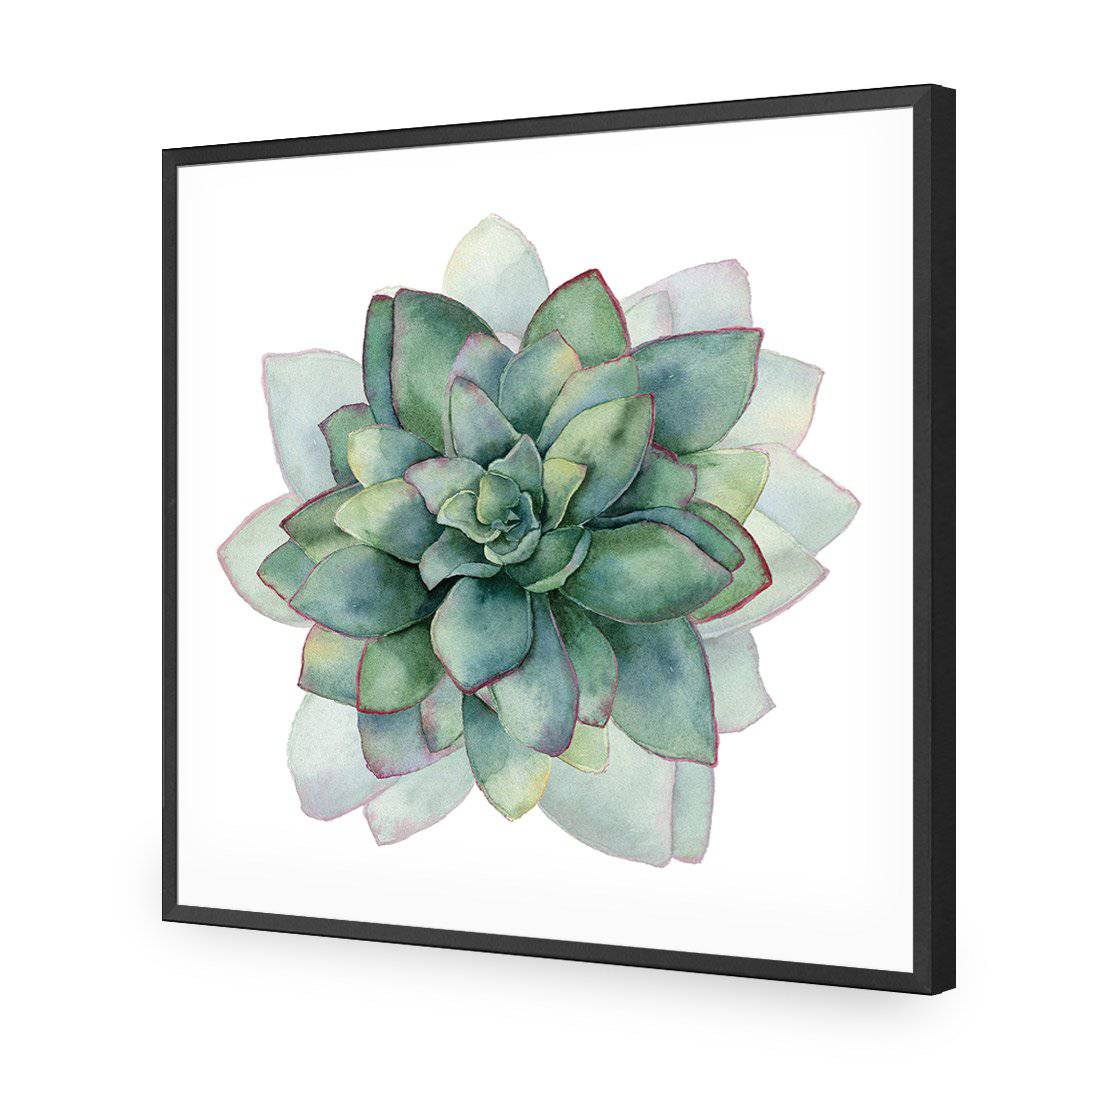 Succulent Spiral, Square-Acrylic-Wall Art Design-Without Border-Acrylic - Black Frame-37x37cm-Wall Art Designs